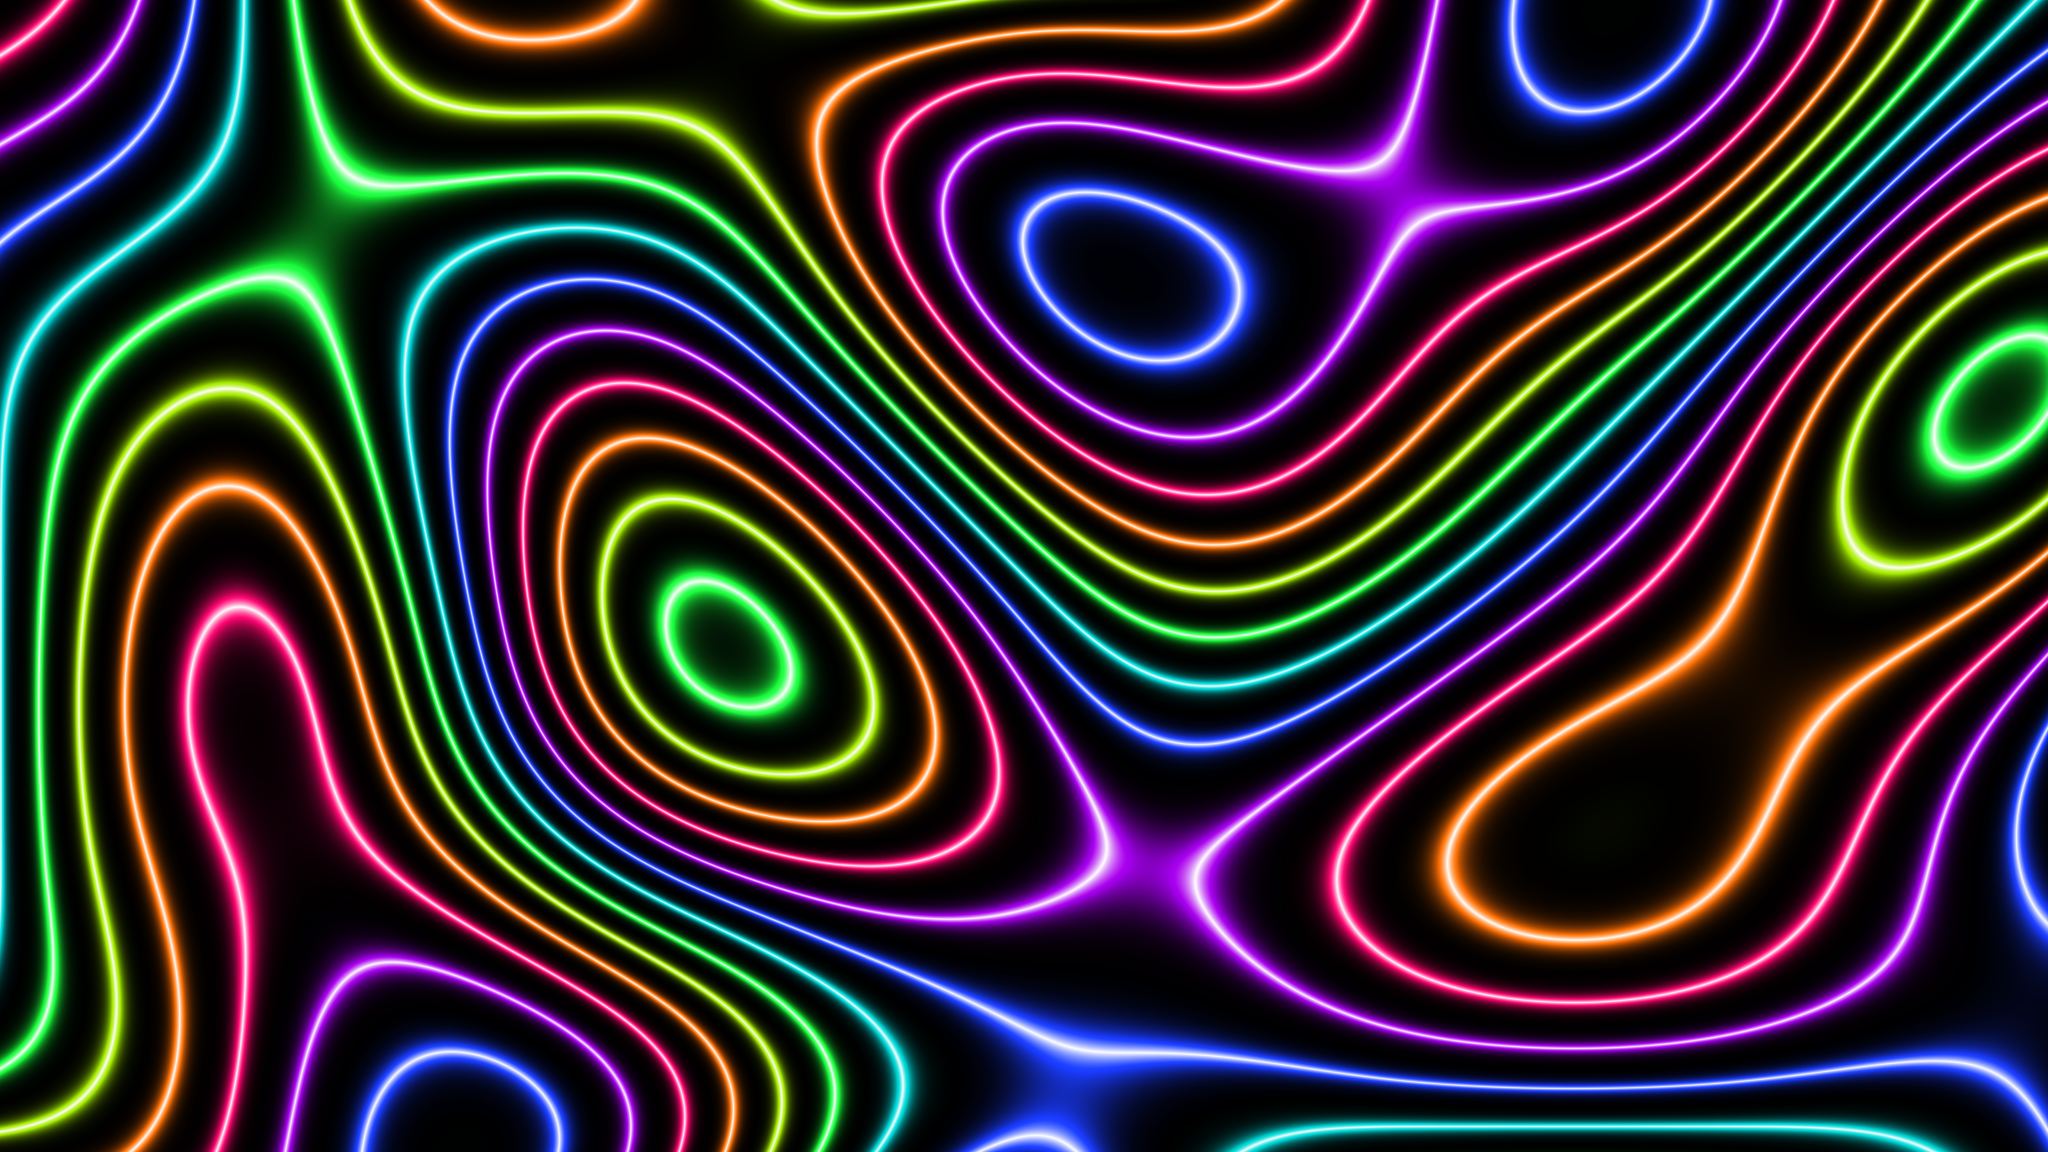 highly-saturated bright contour lines on a black background